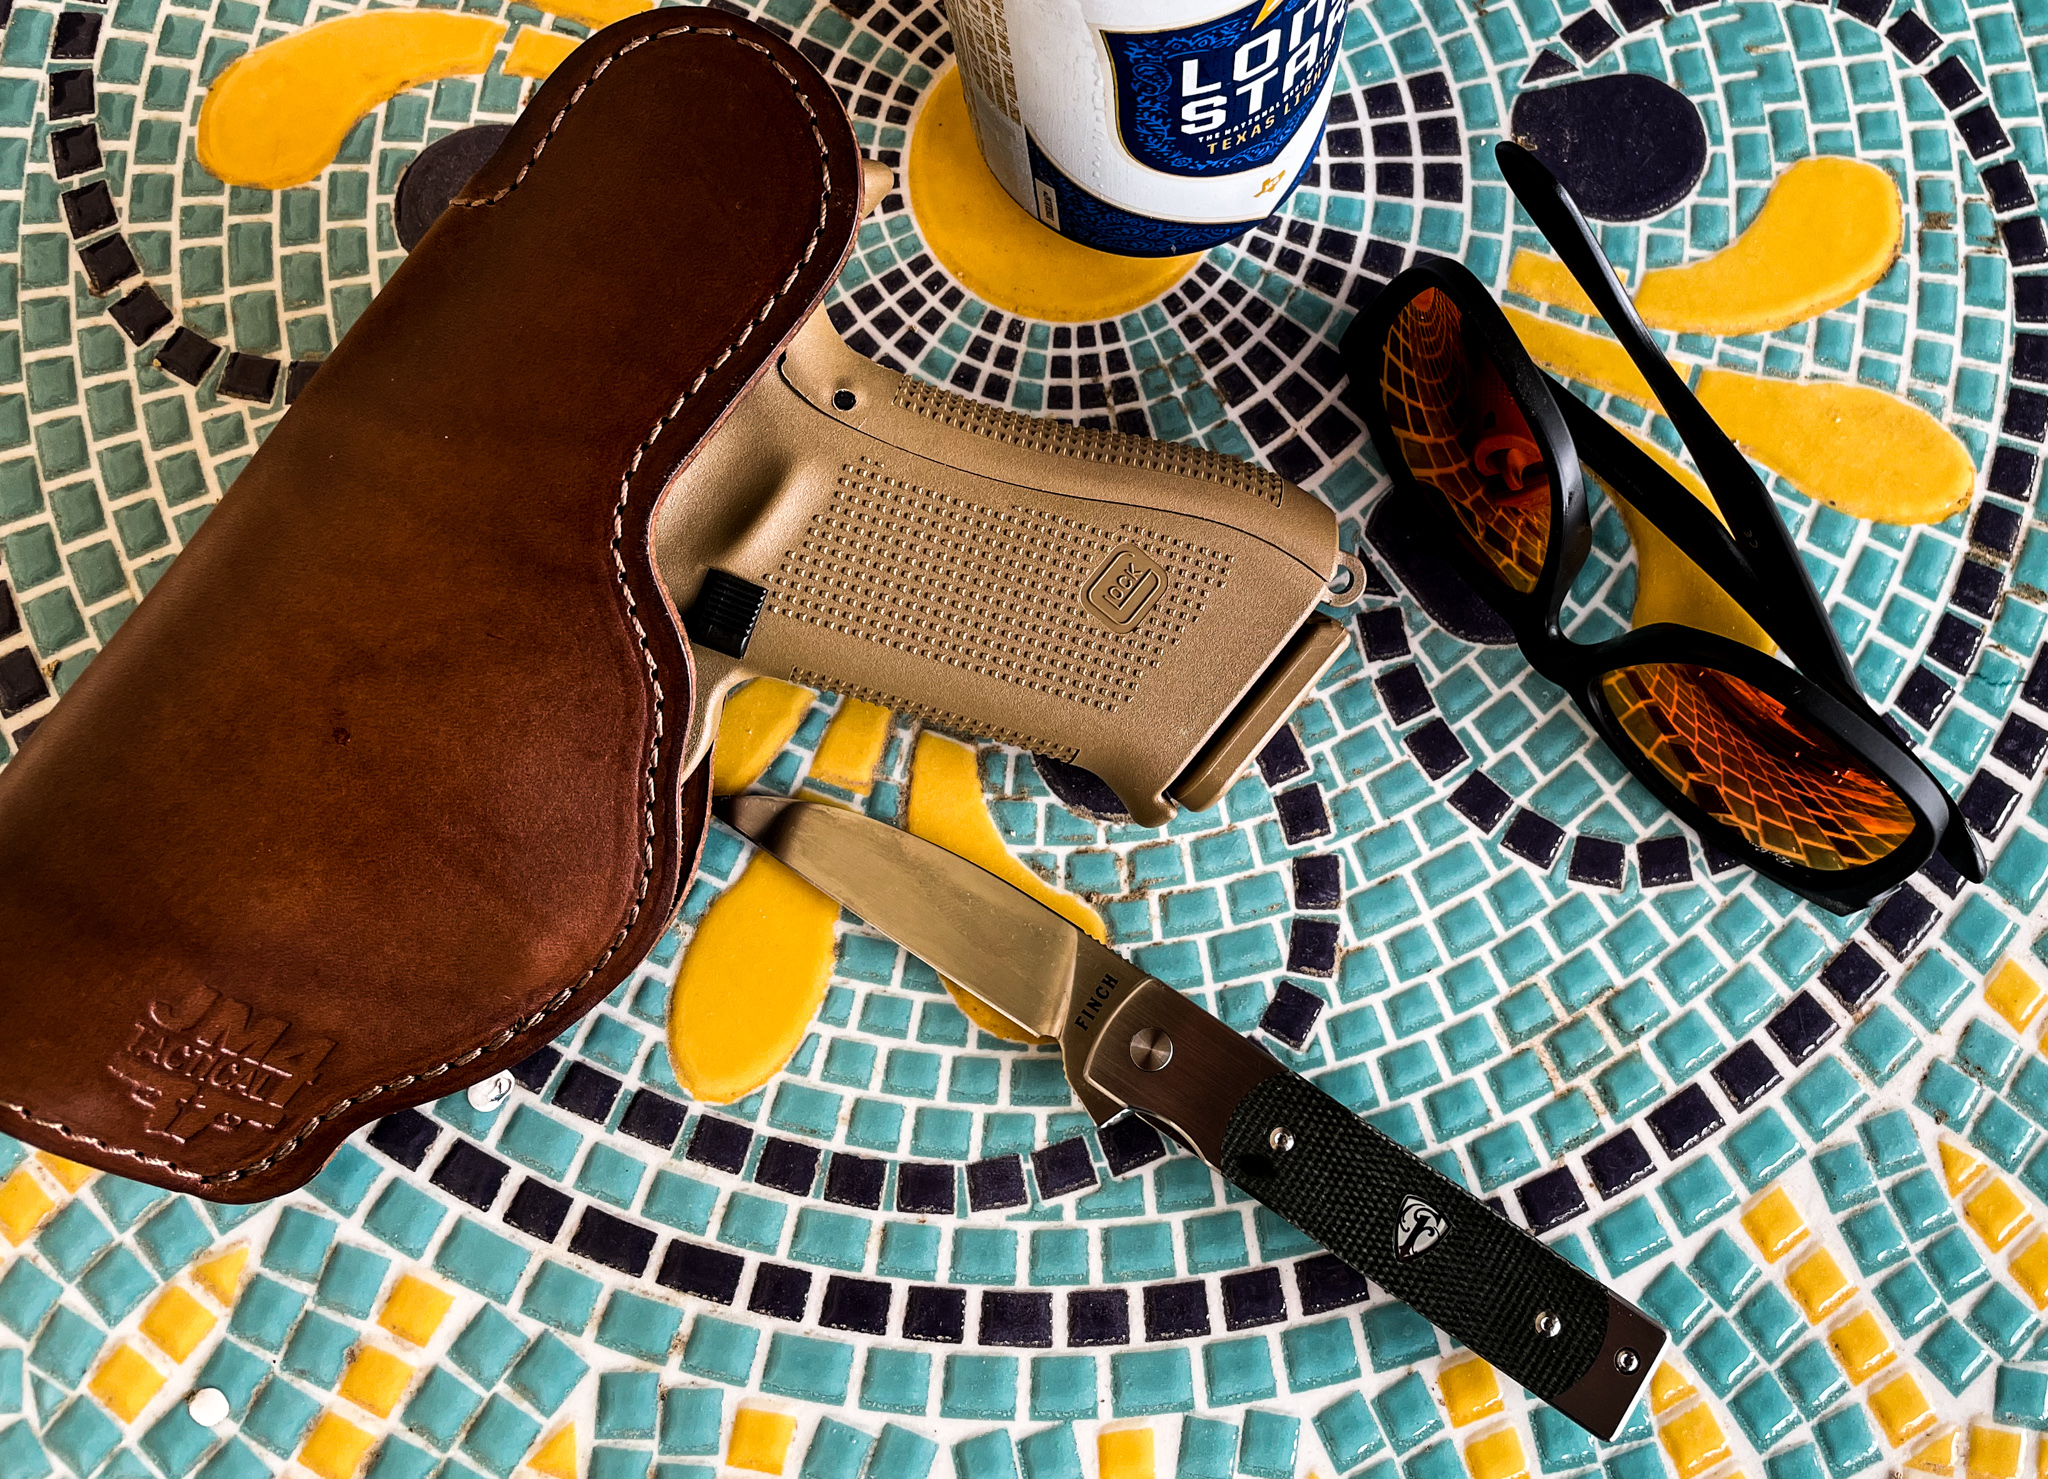 An EDC dream come true - ray bans, Glock 19x, and old school The Holliday